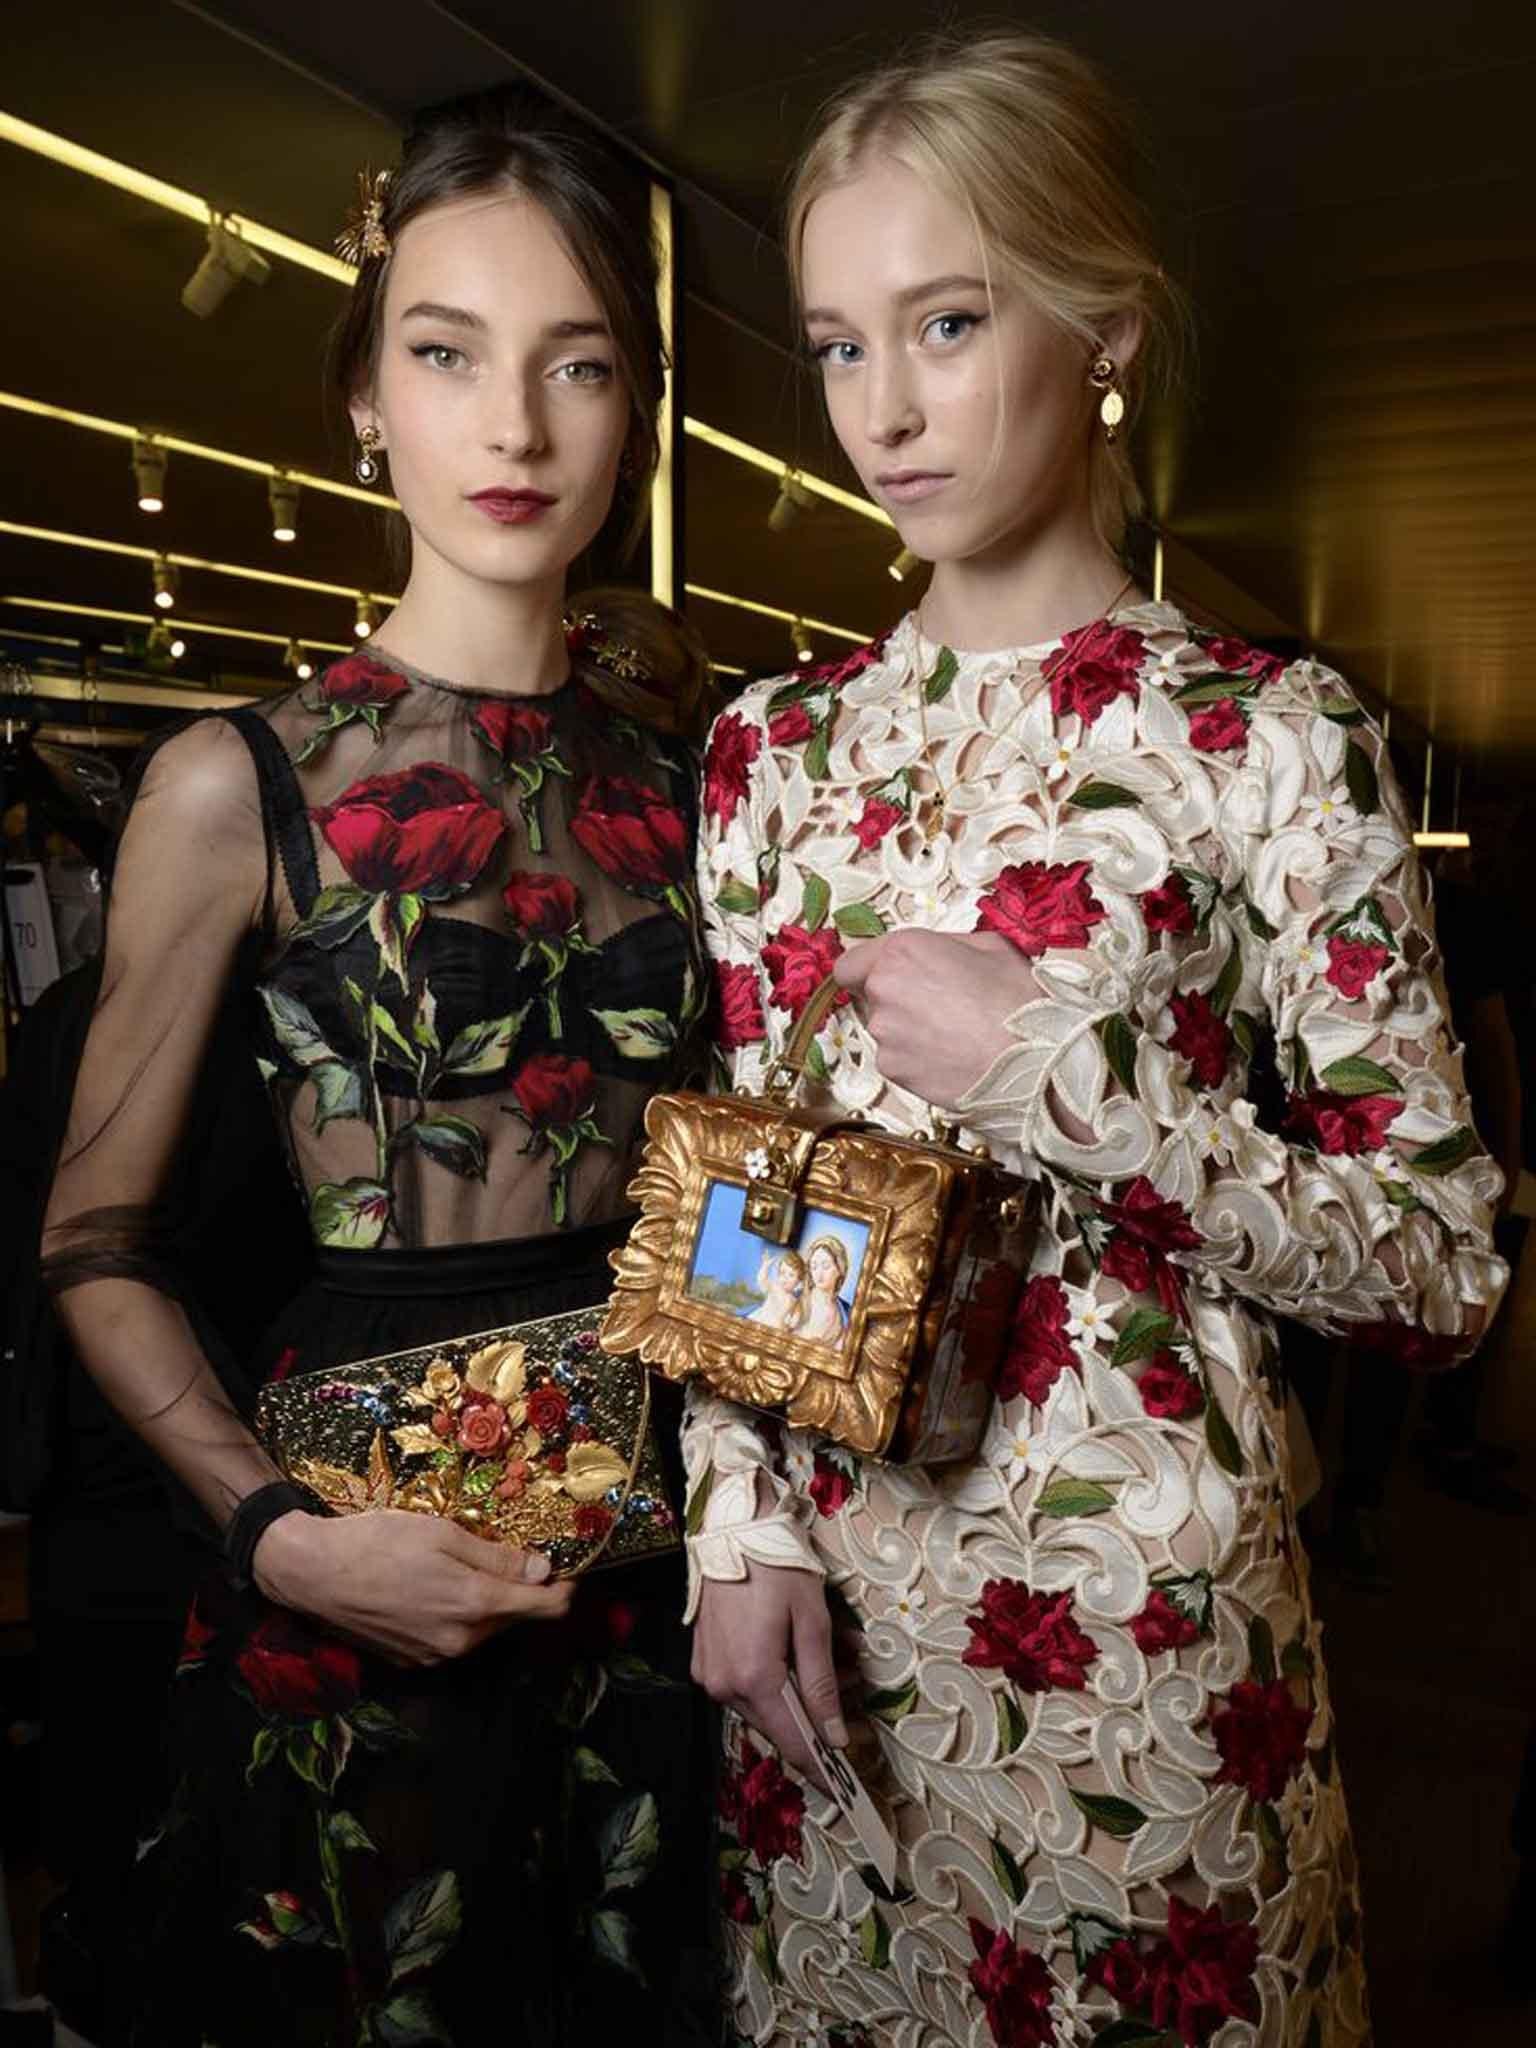 Florals came in the form of heavy embroidery and embellishment at Dolce &amp; Gabbana